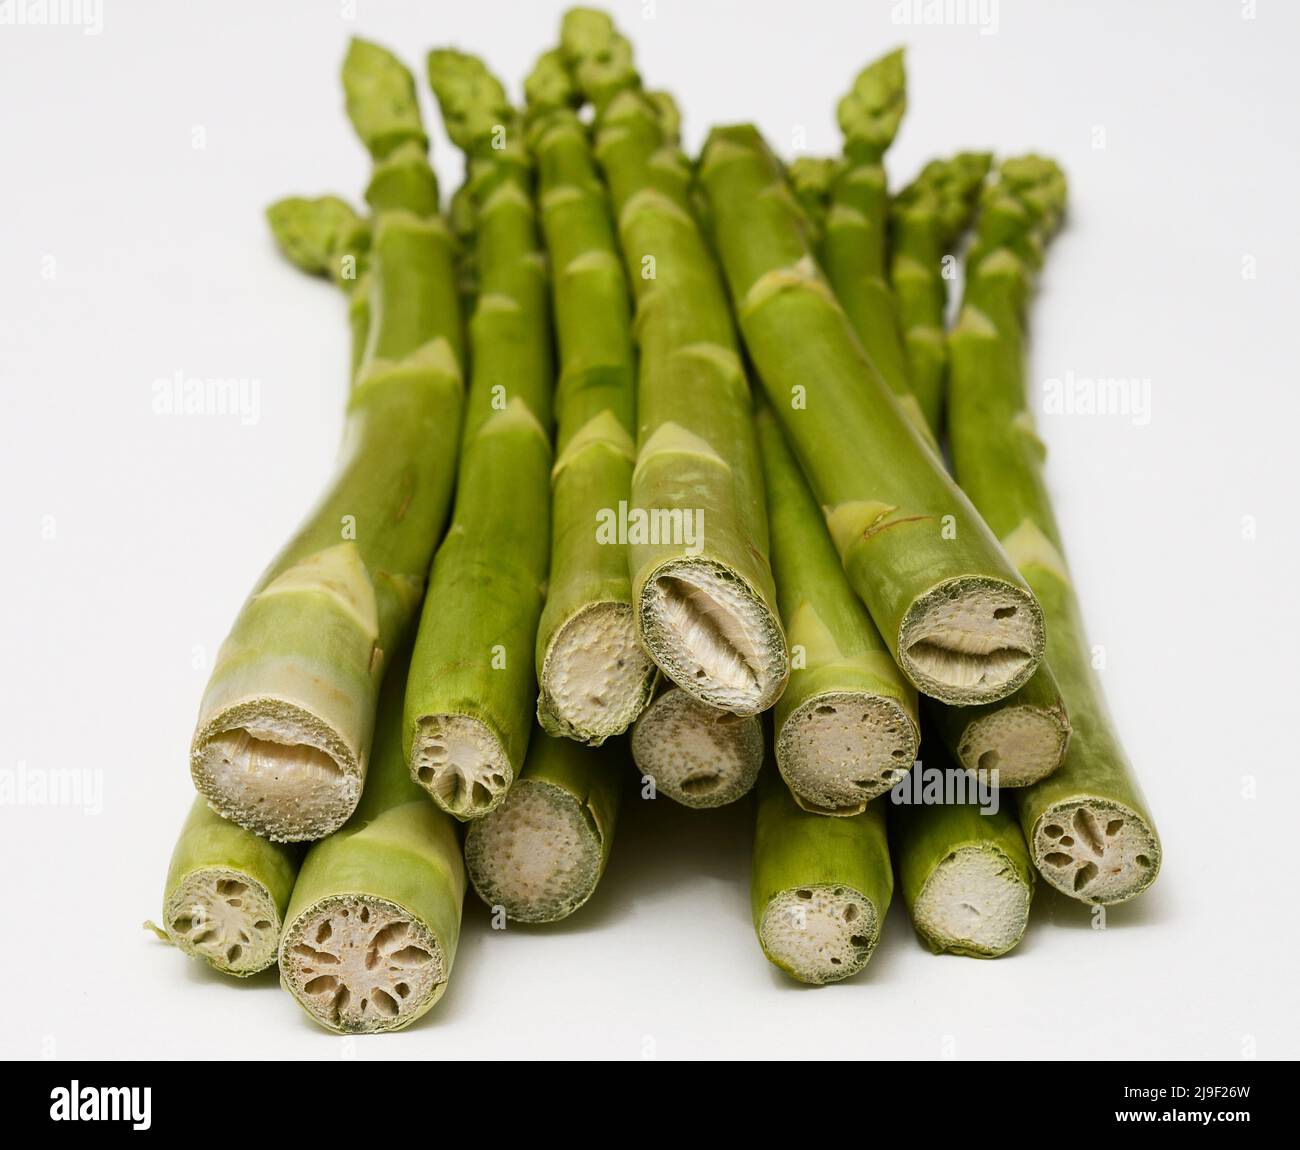 a bunch of asparagus on a white background Stock Photo